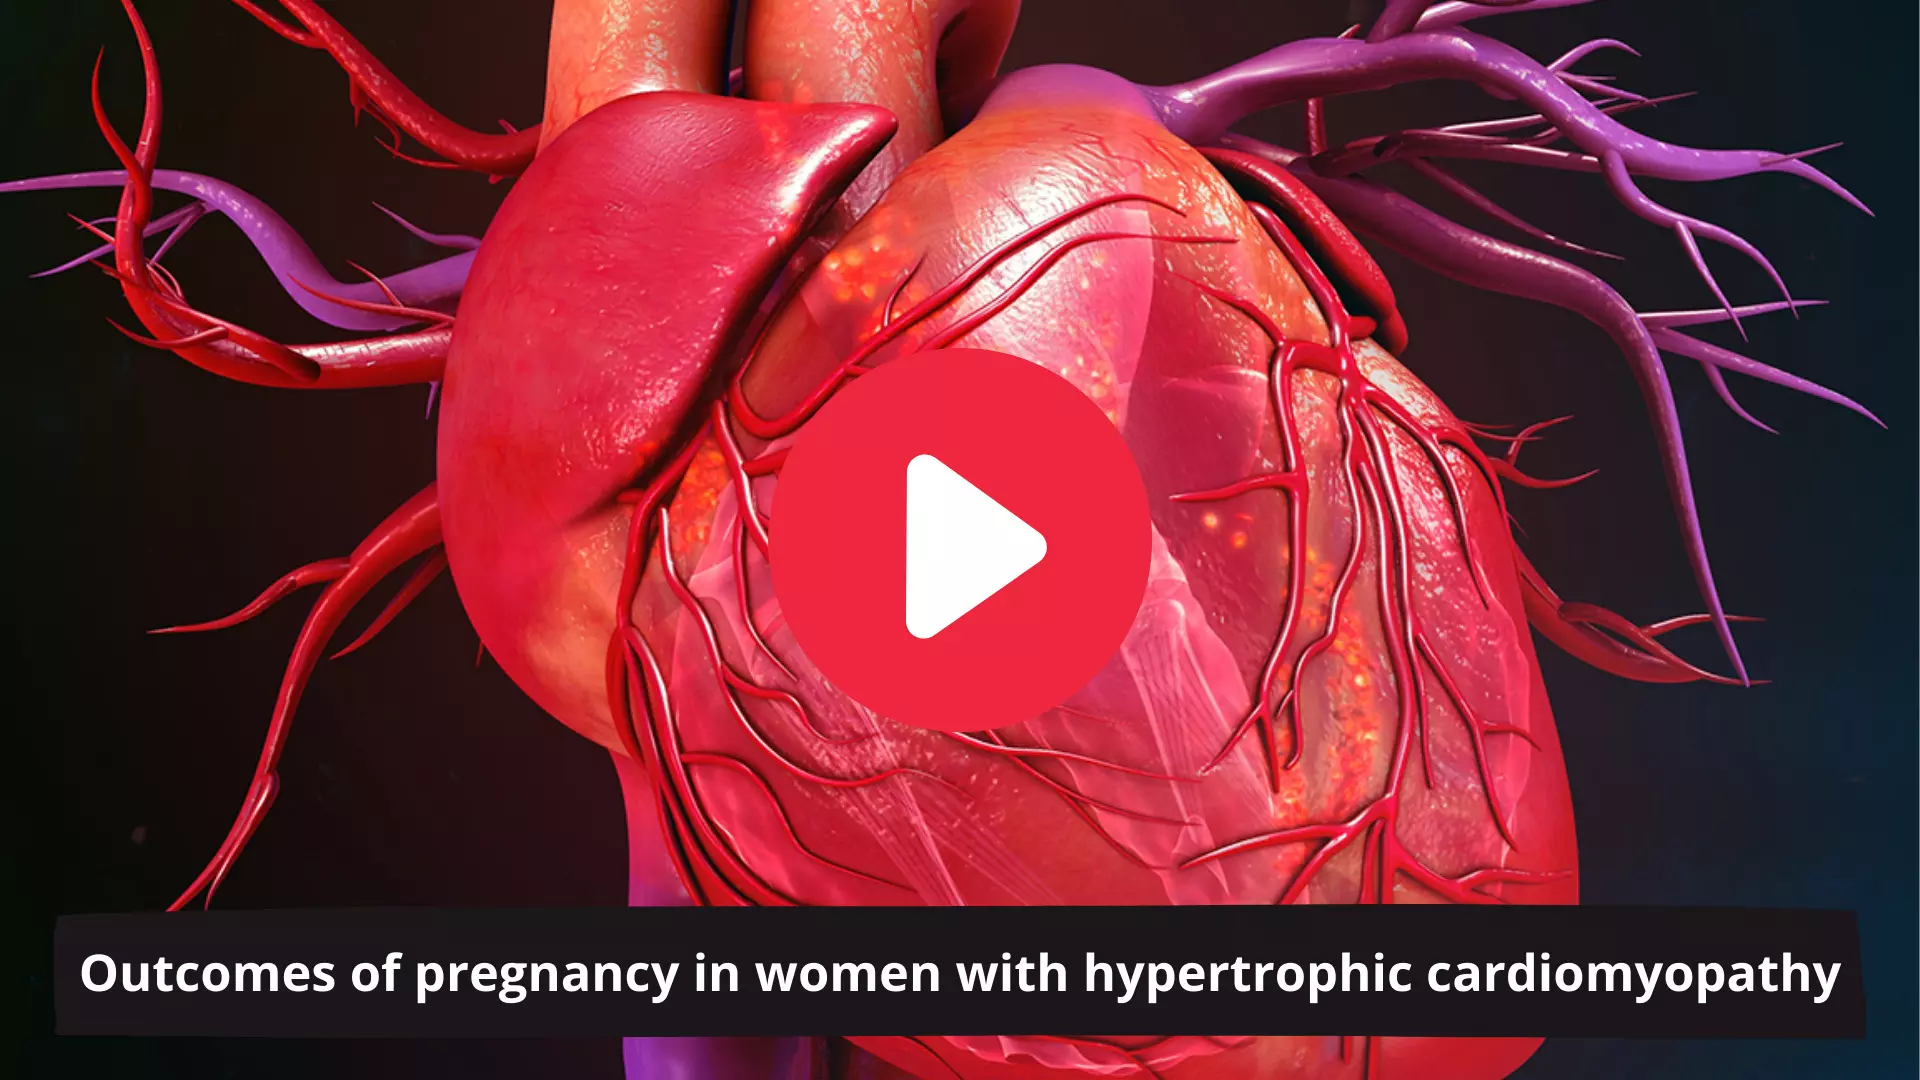 Outcomes of pregnancy in women with hypertrophic cardiomyopathy